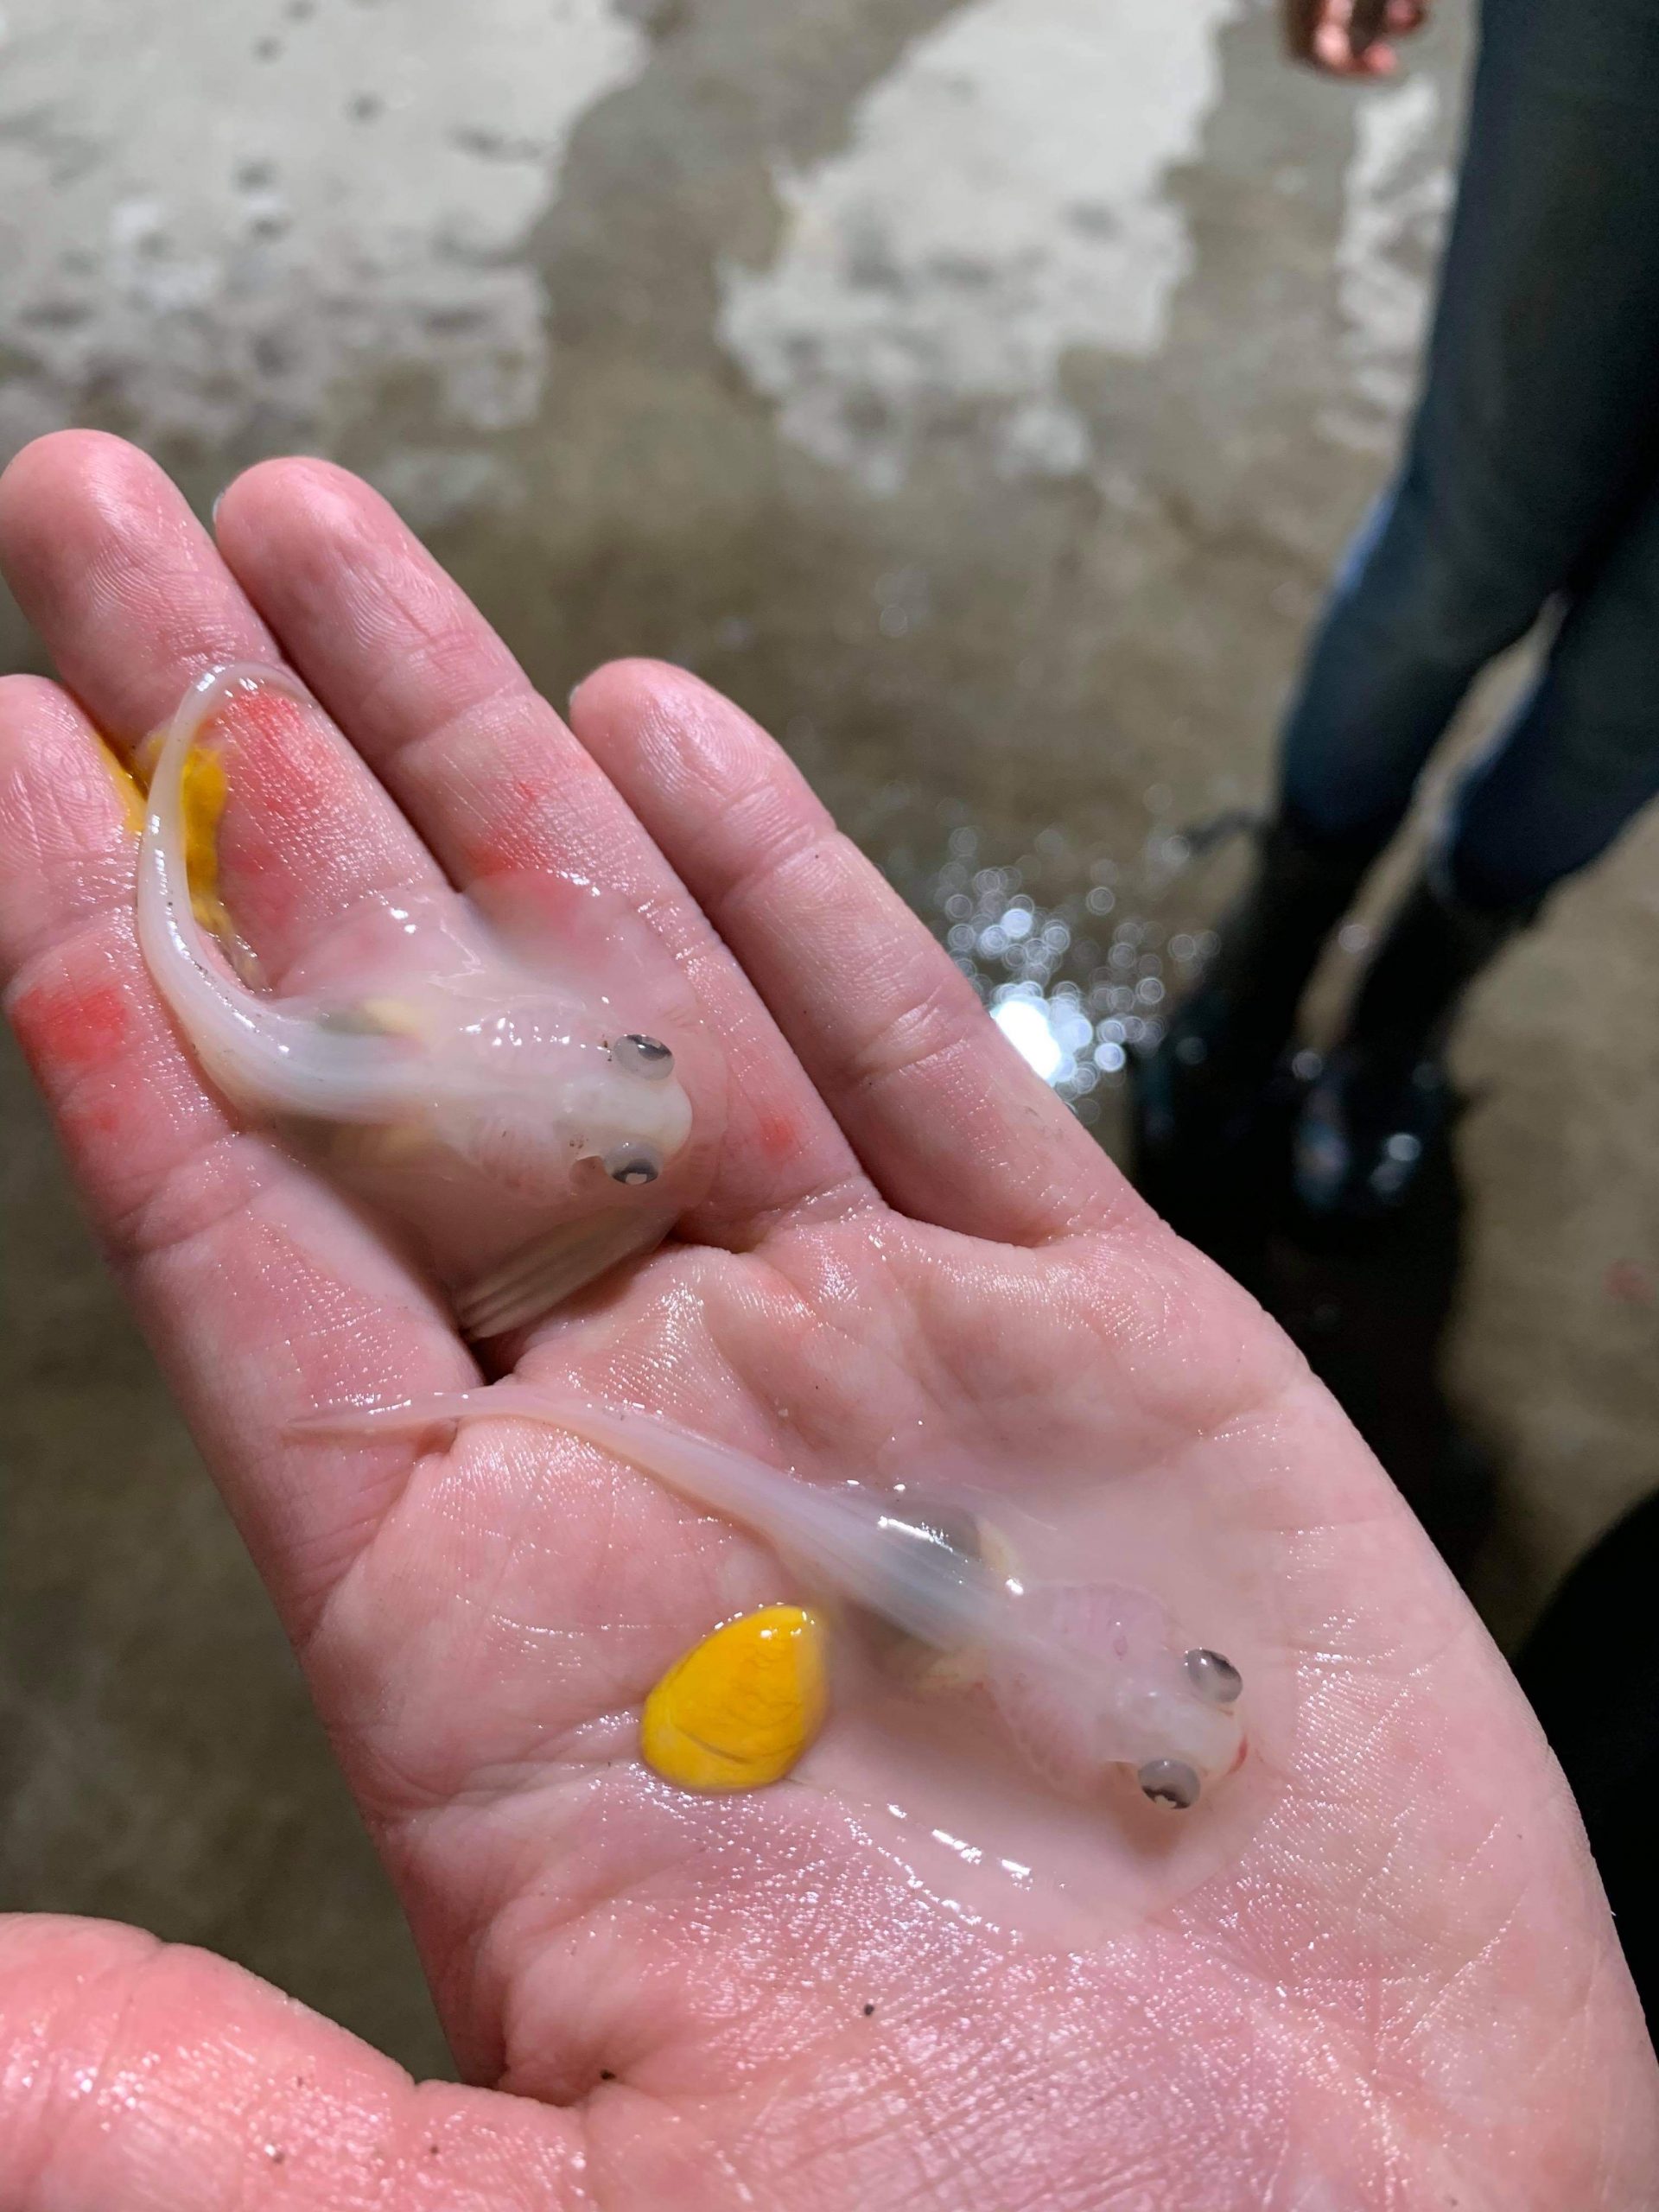 Premature ejected stingray pups during Sea Shelter rescue